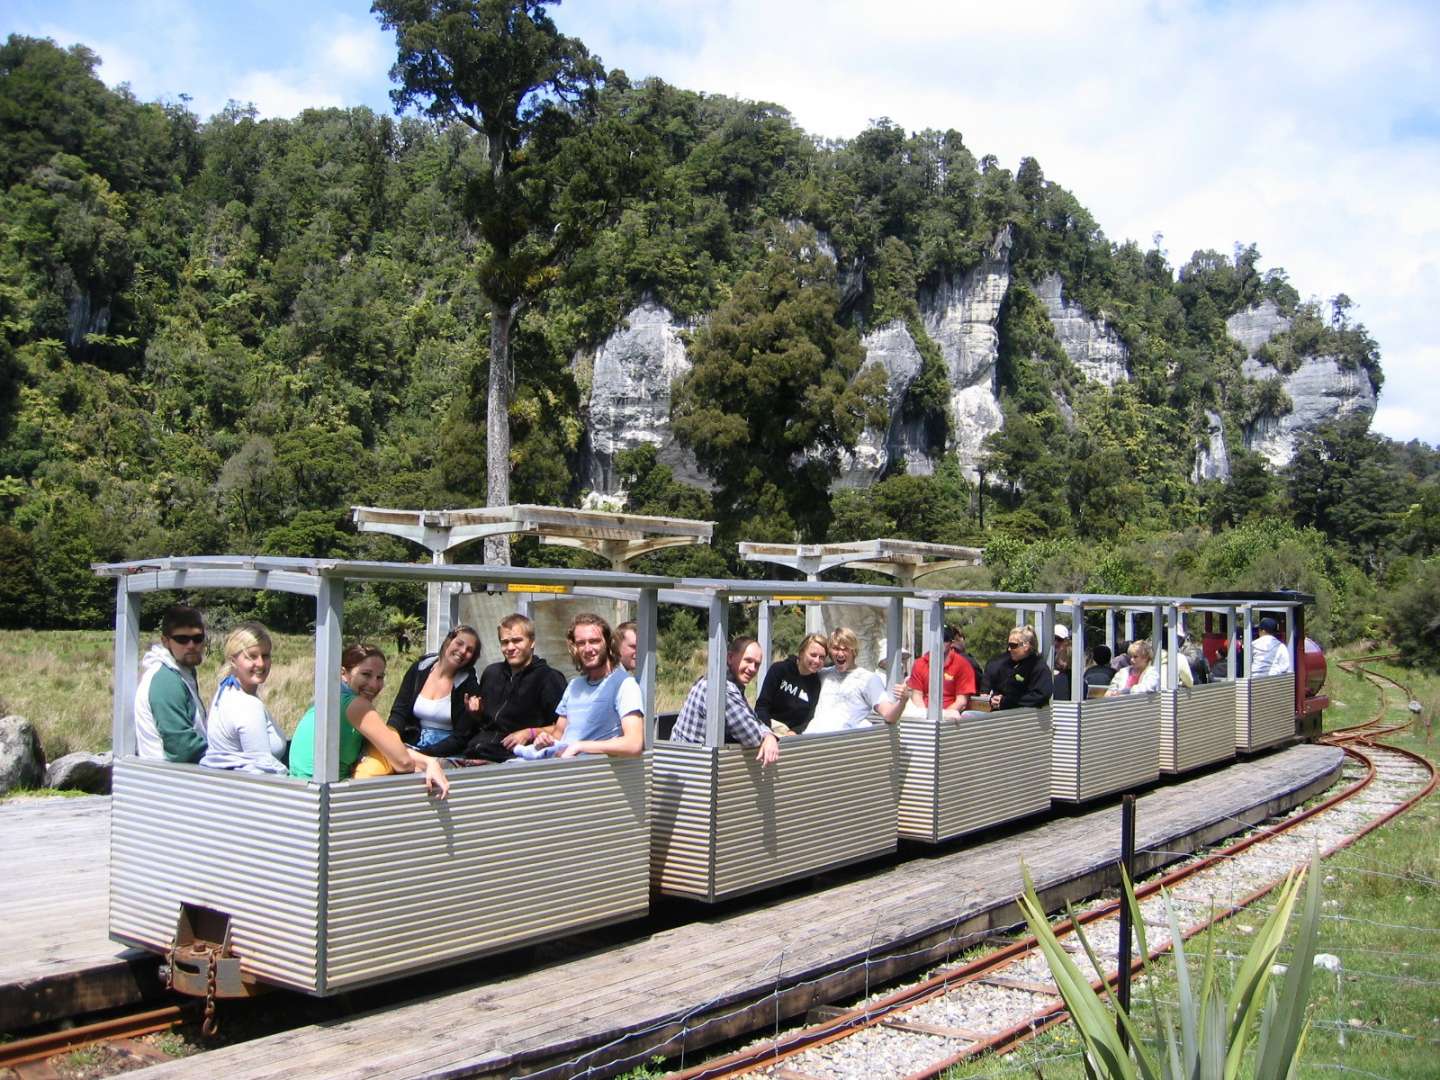 Rainforest Trains at the start of the Ananui Canyon